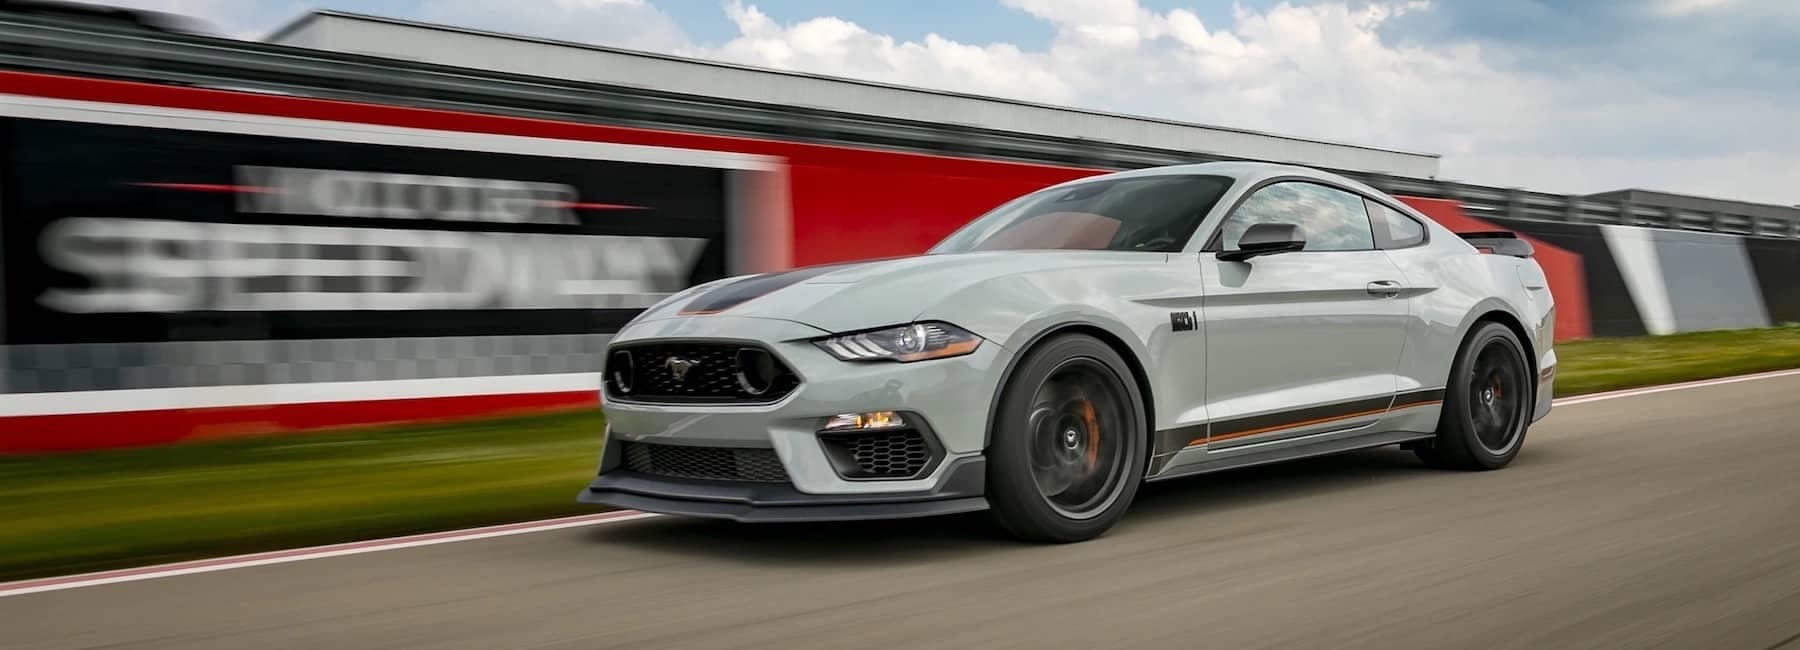 2023 Grey Mustang racing on the track.